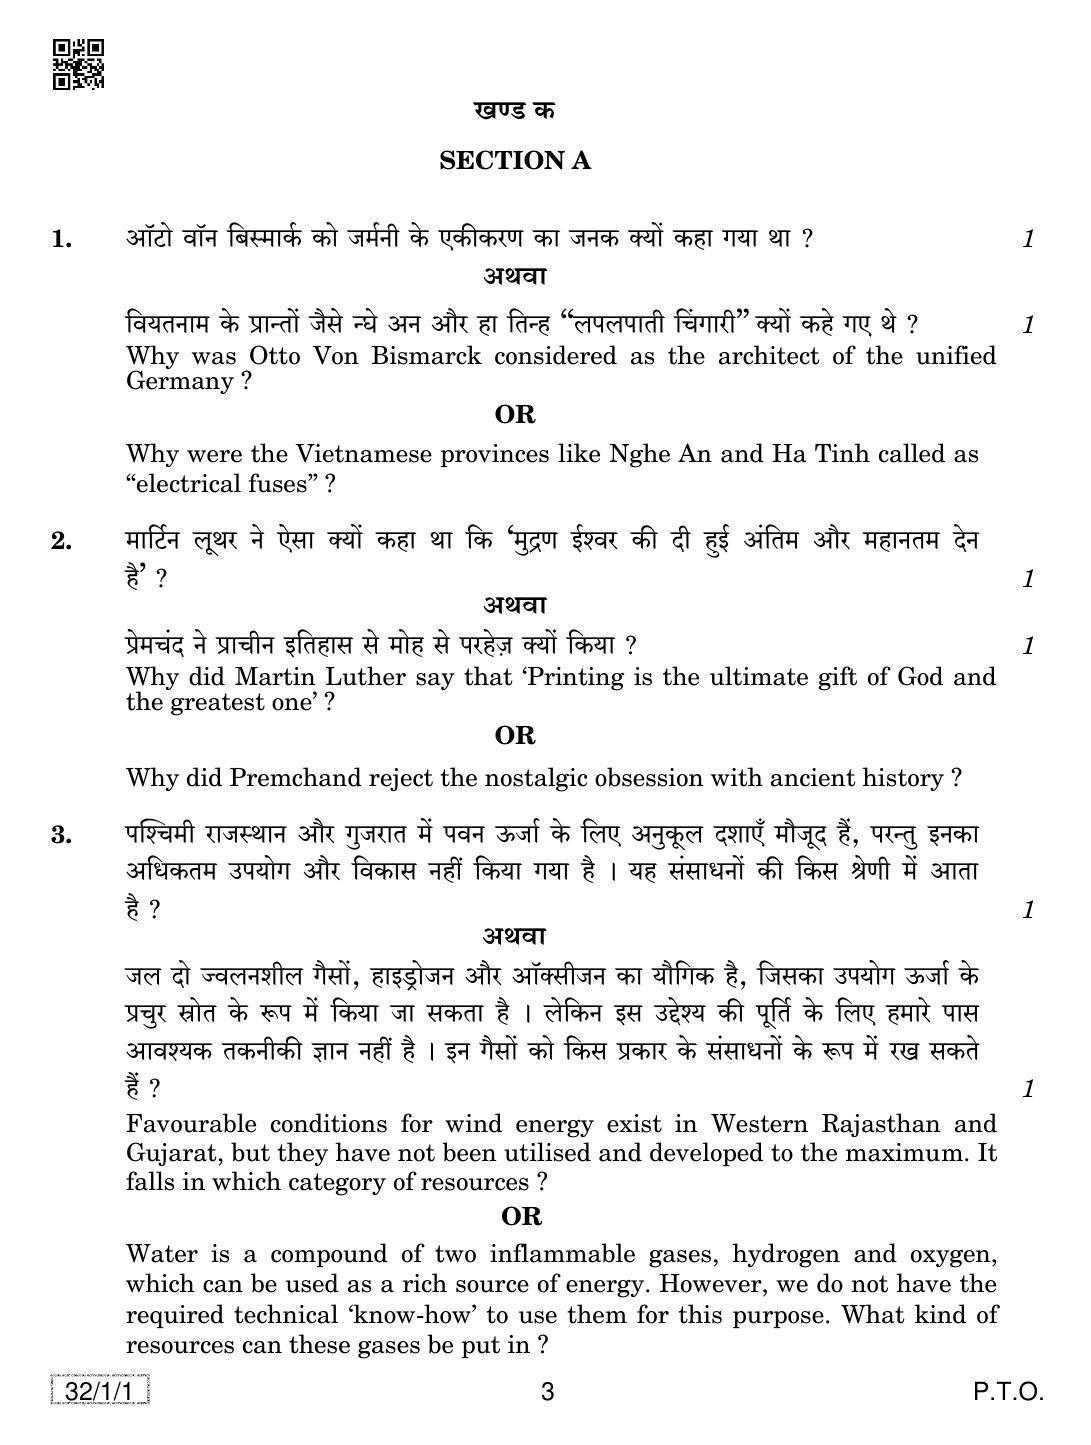 CBSE Class 10 32-1-1 SOCIAL SCIENCE 2019 Compartment Question Paper - Page 3